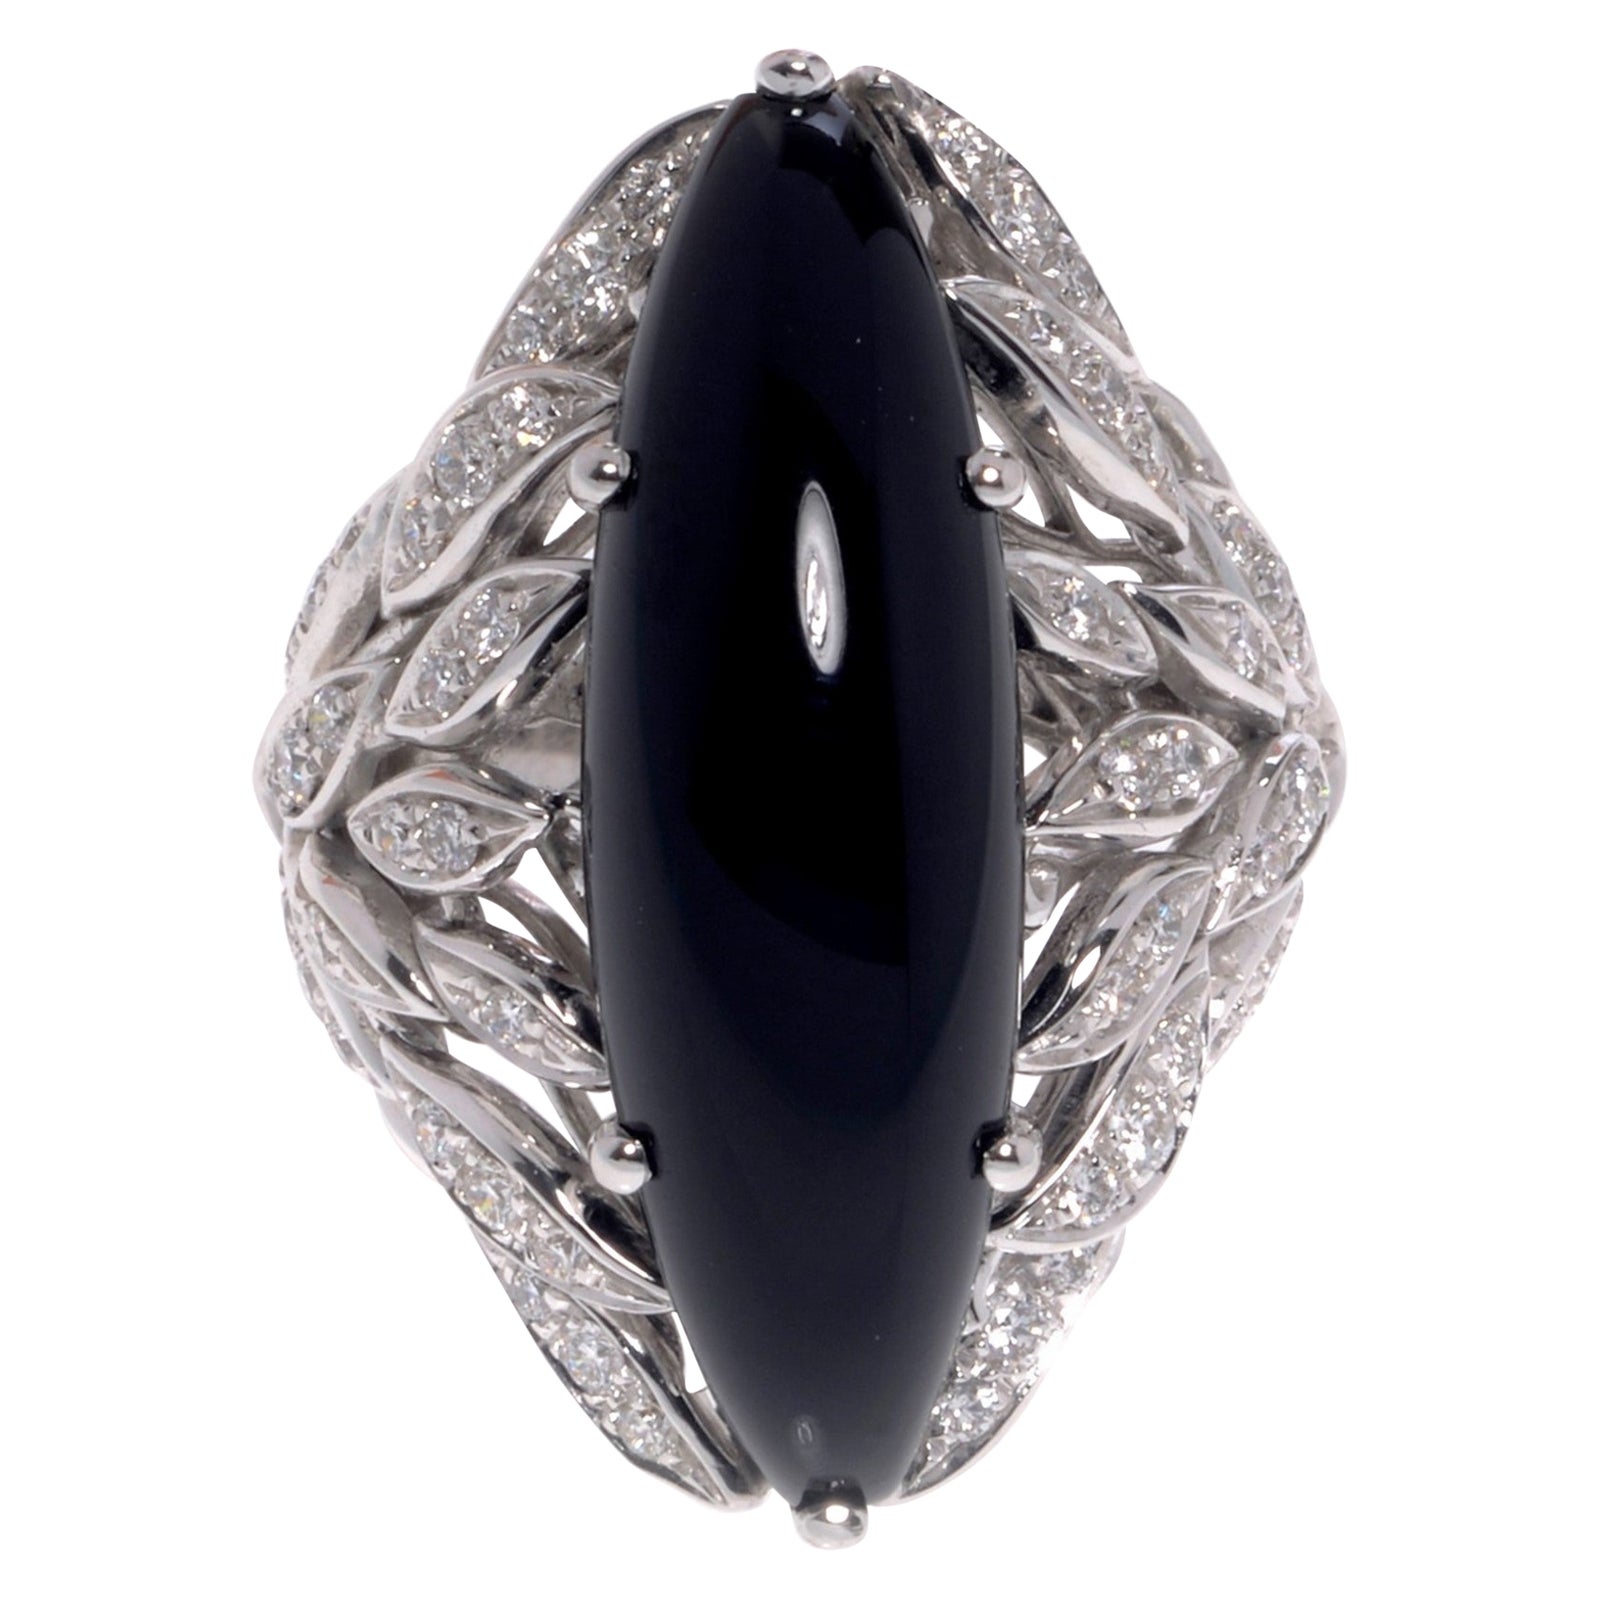 Luca Carati Black Onyx Diamond Cocktail Ring 18K White Gold 0.79Cttw Size 6.5 For Sale